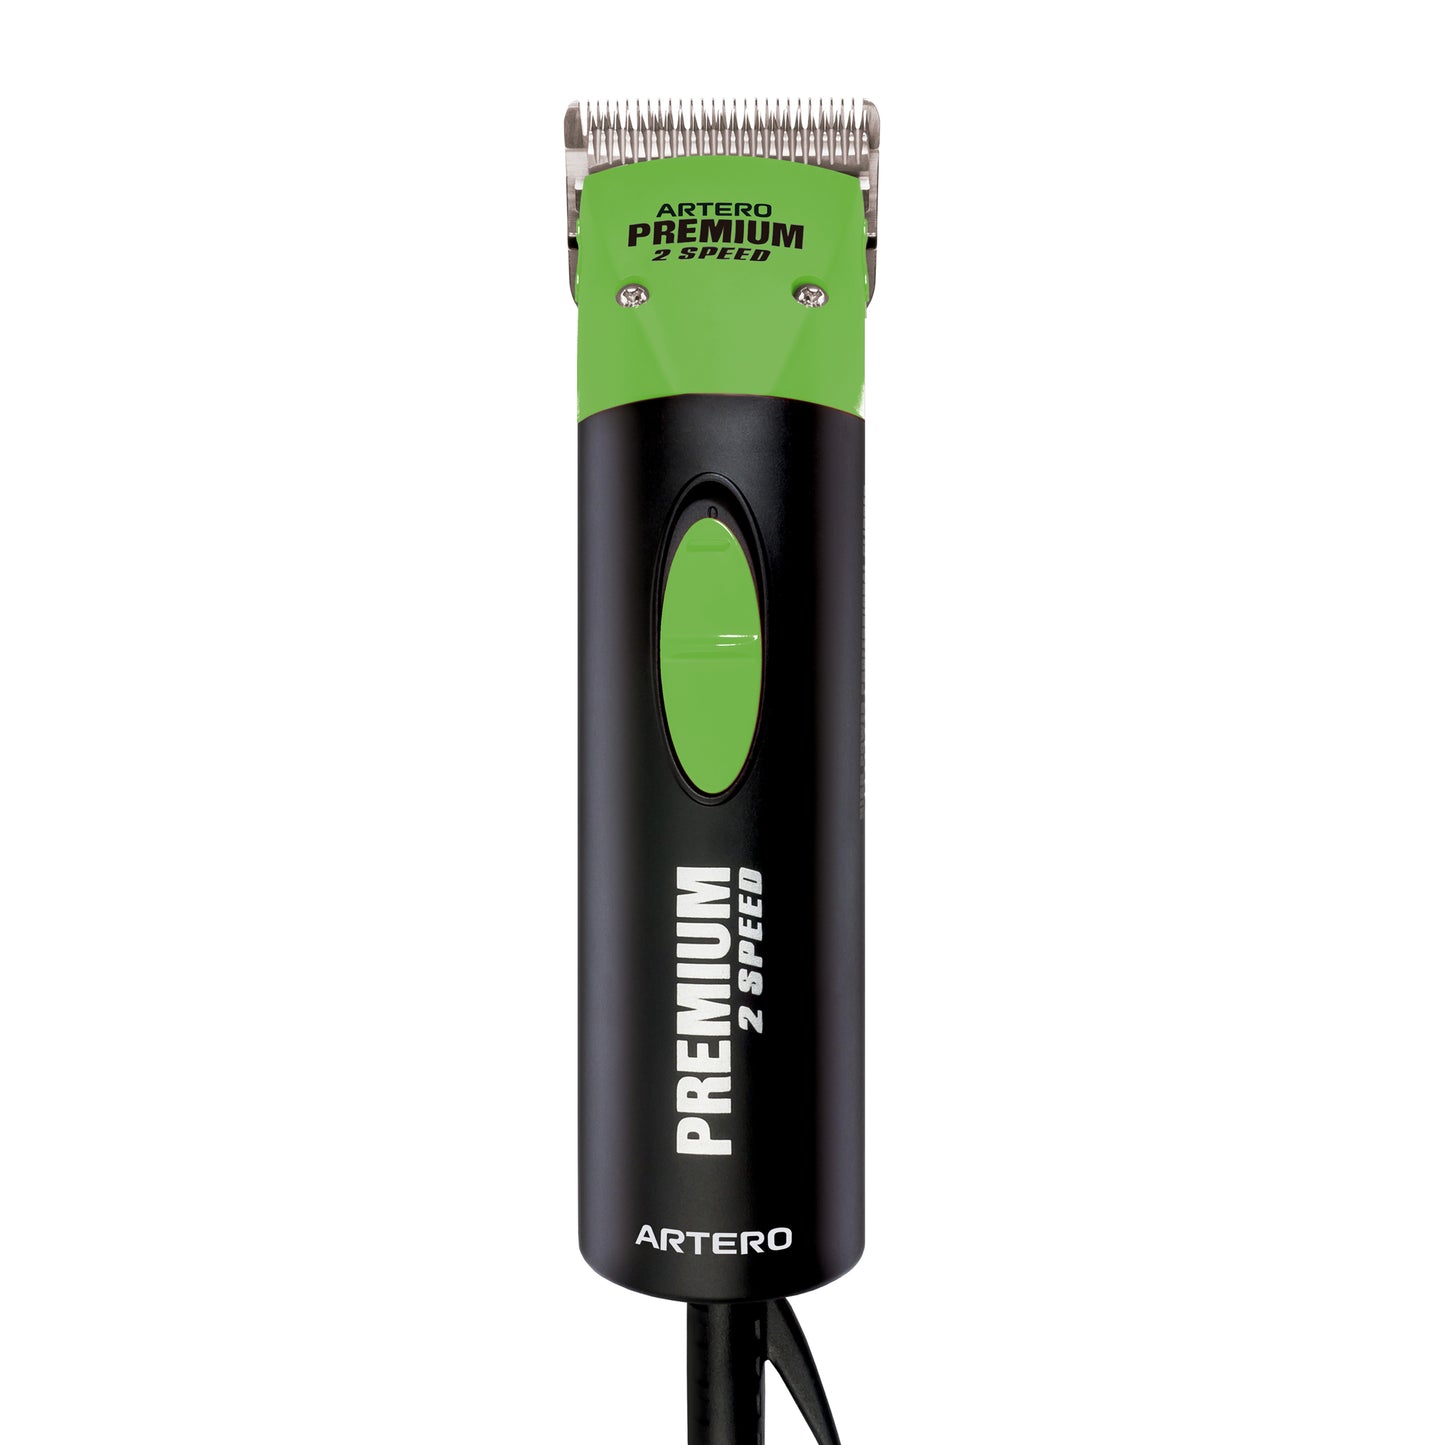 The Artero A5 Premium Professional Pet Grooming Clipper 2 Speed provides reliable, flawless performance. Its two speeds can be switched seamlessly and it's compatible with Andis, Oster, Wahl, Artero, and Geib Blades. This Professional Pet Clipper creates very low noise and vibration and is extremely light weight. Color Green.